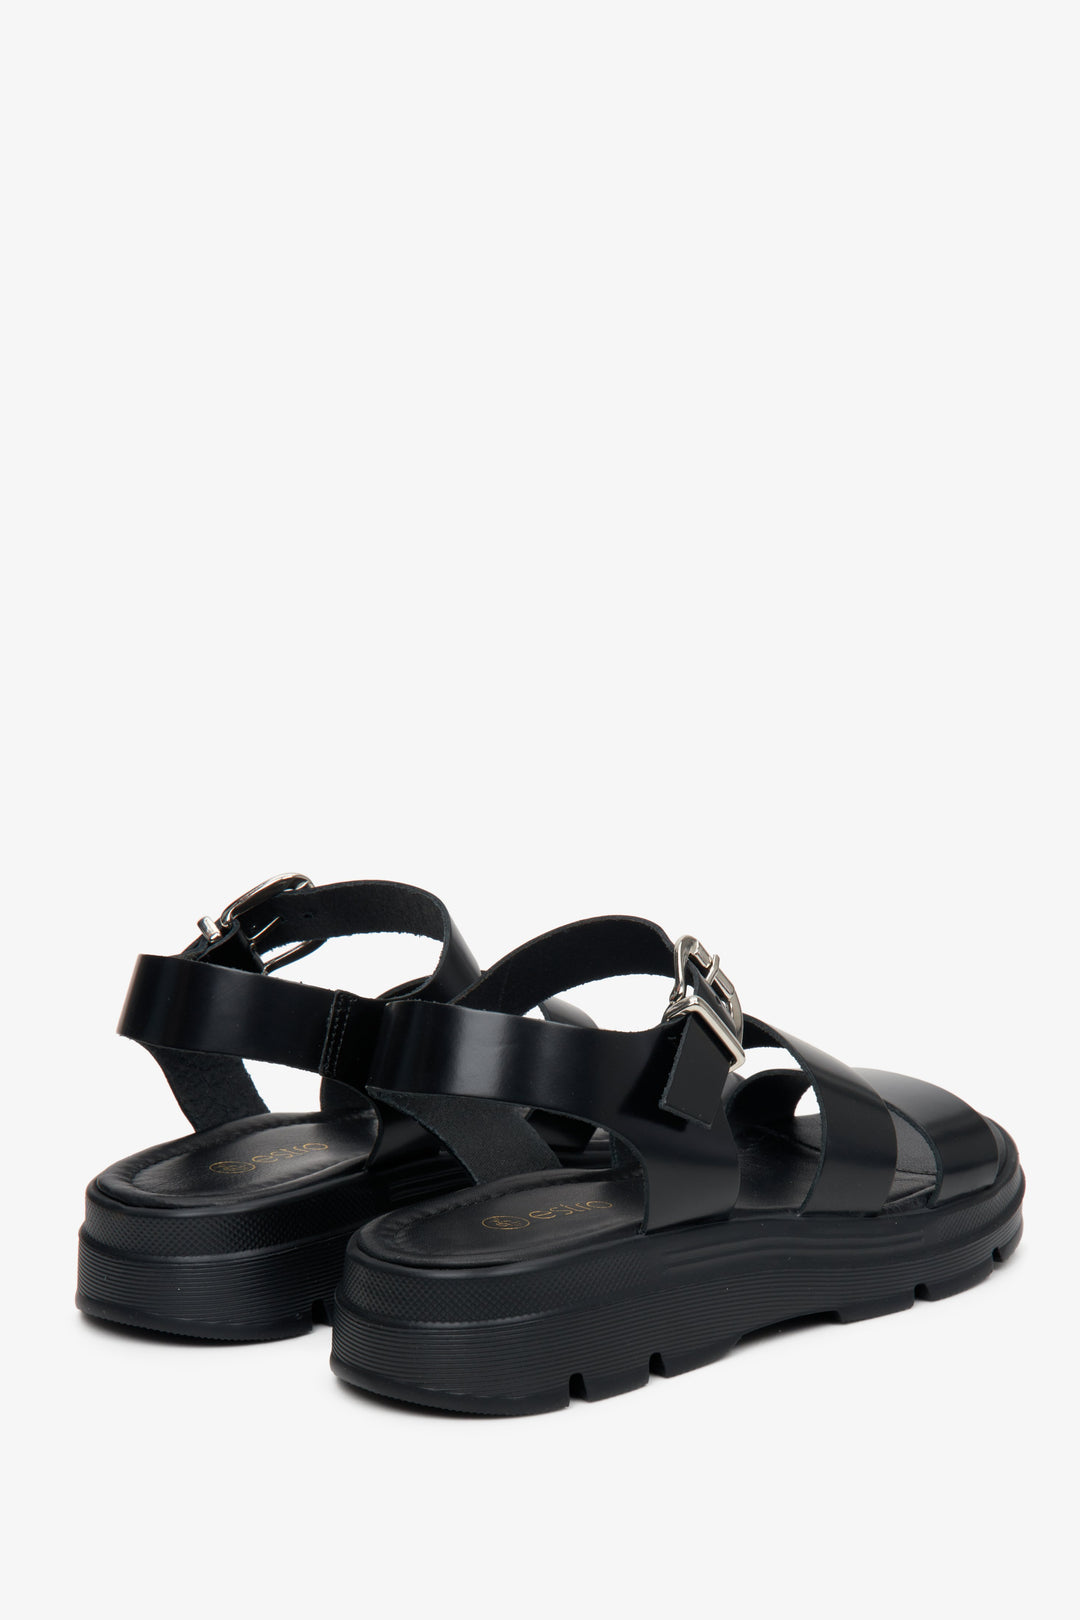 Women's sandals made of Italian natural leather in black Estro - close-up of the back of the shoes.